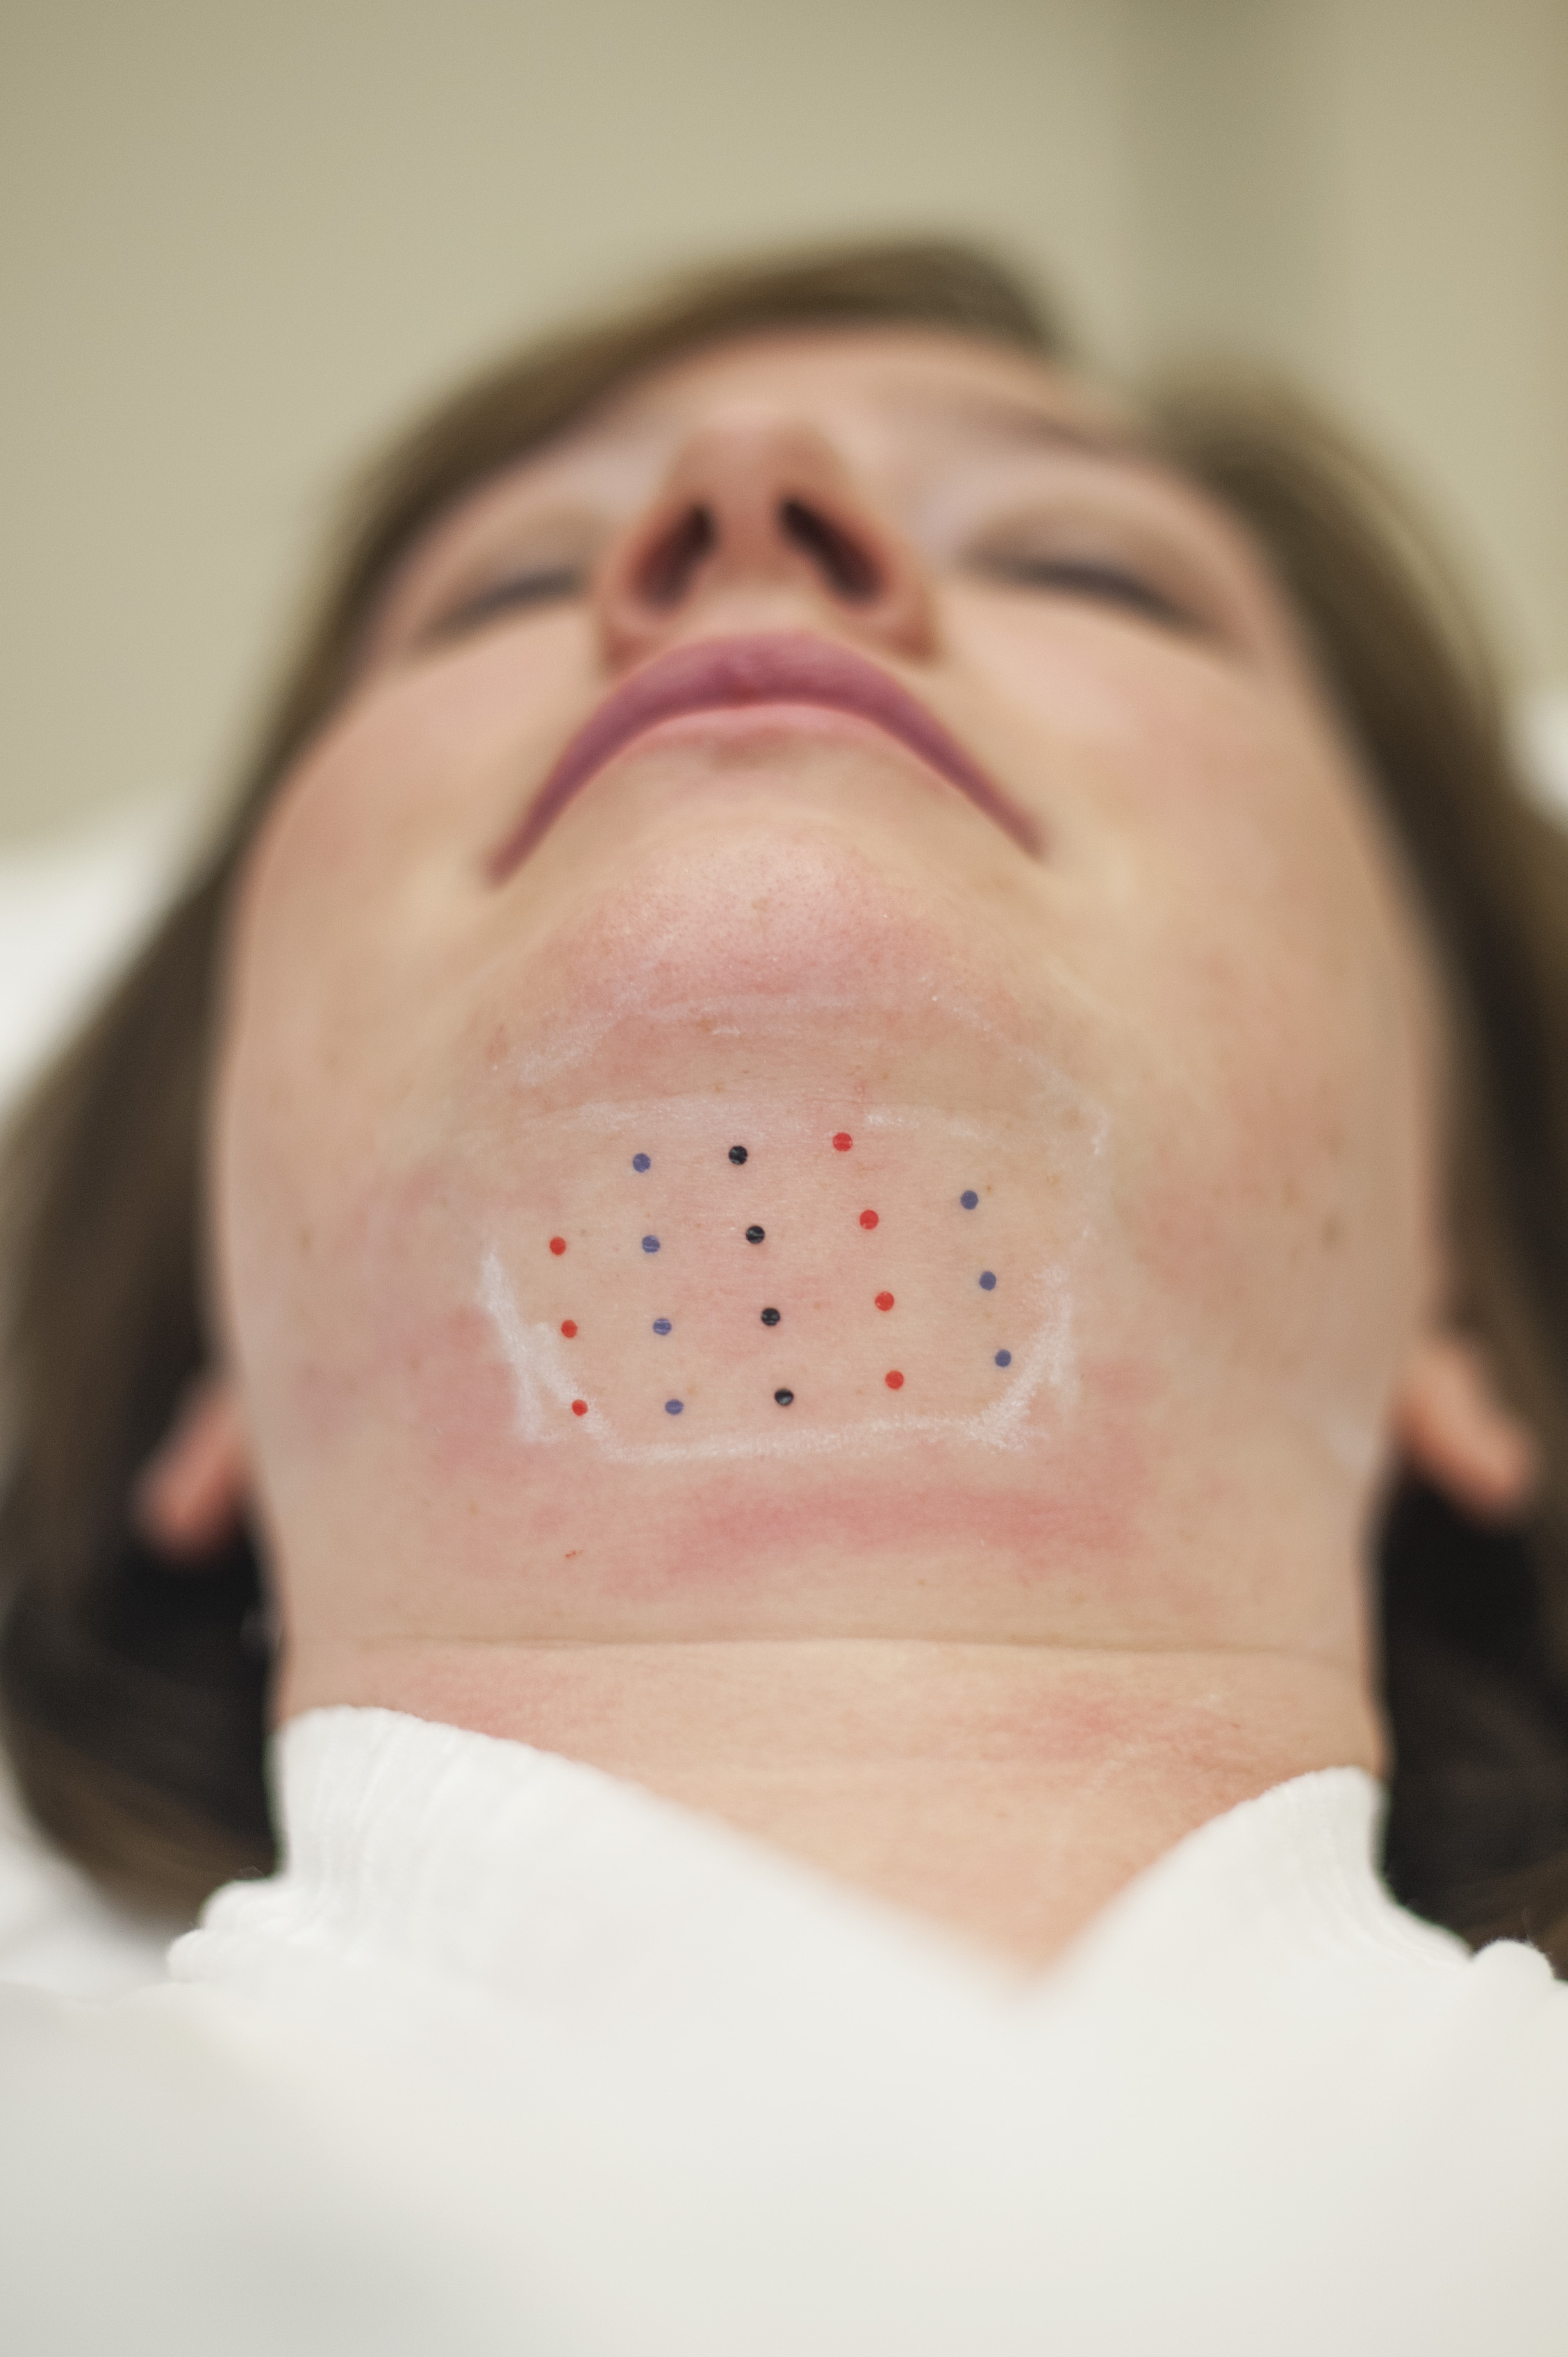 Patient marked for Kybella injection